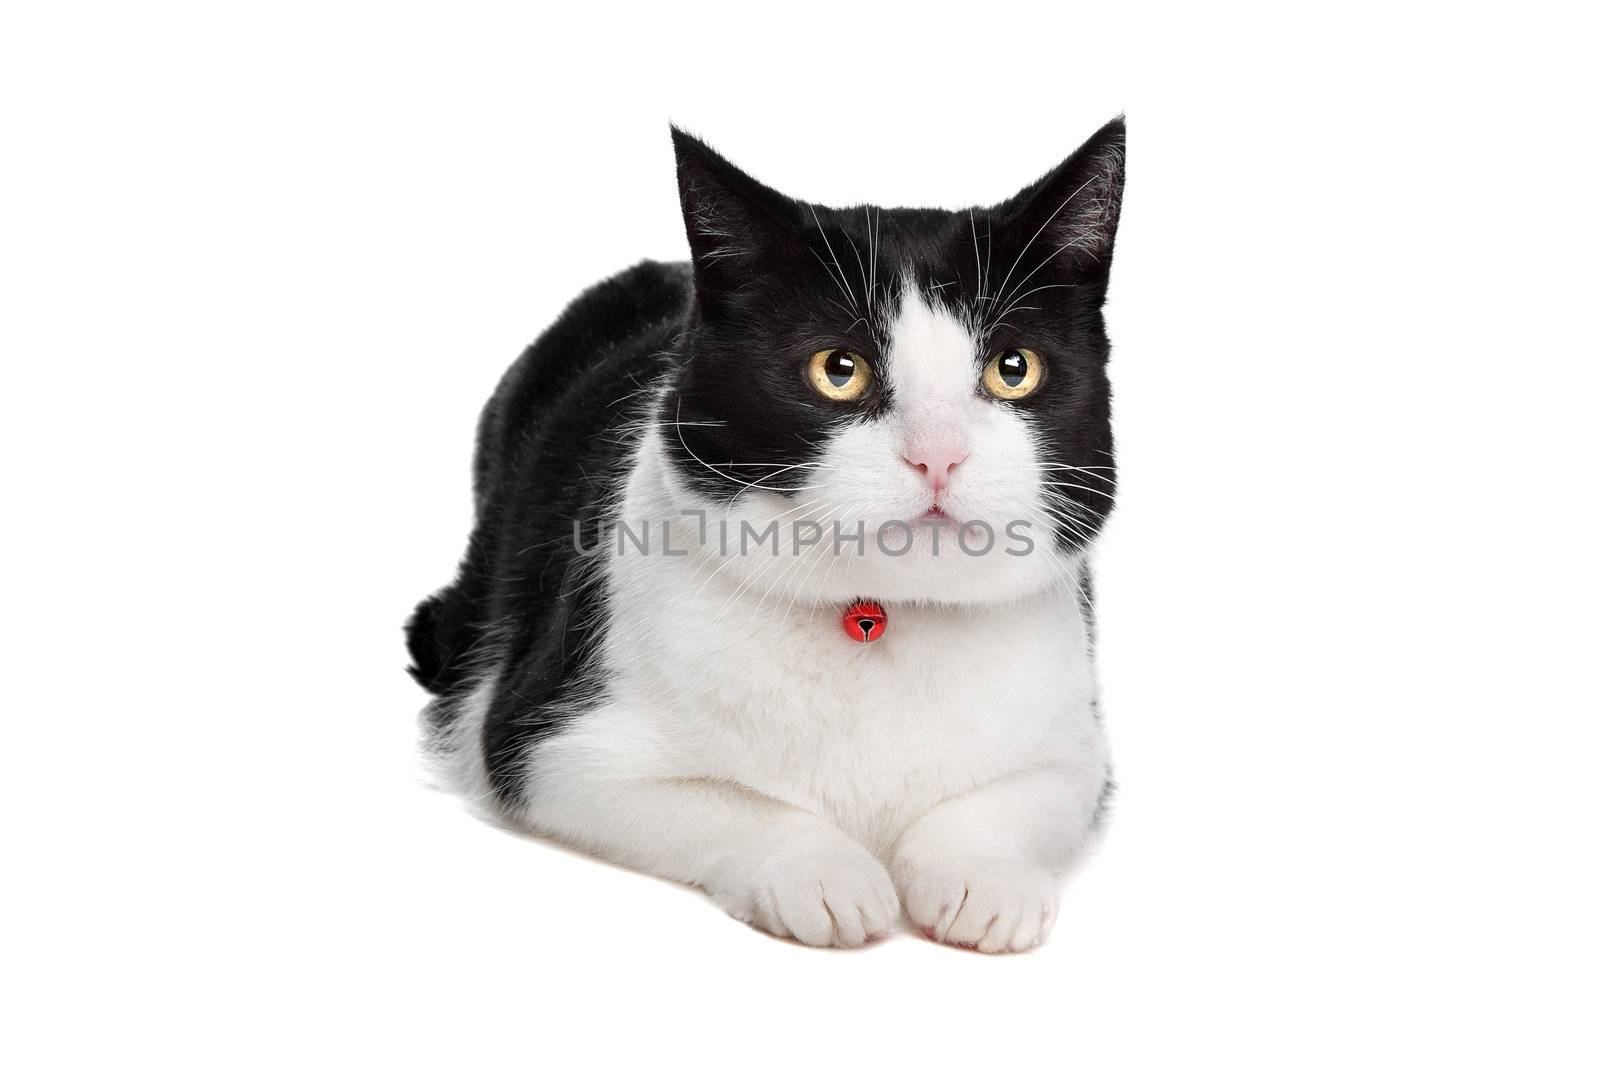 Black and white cat in front of a white background